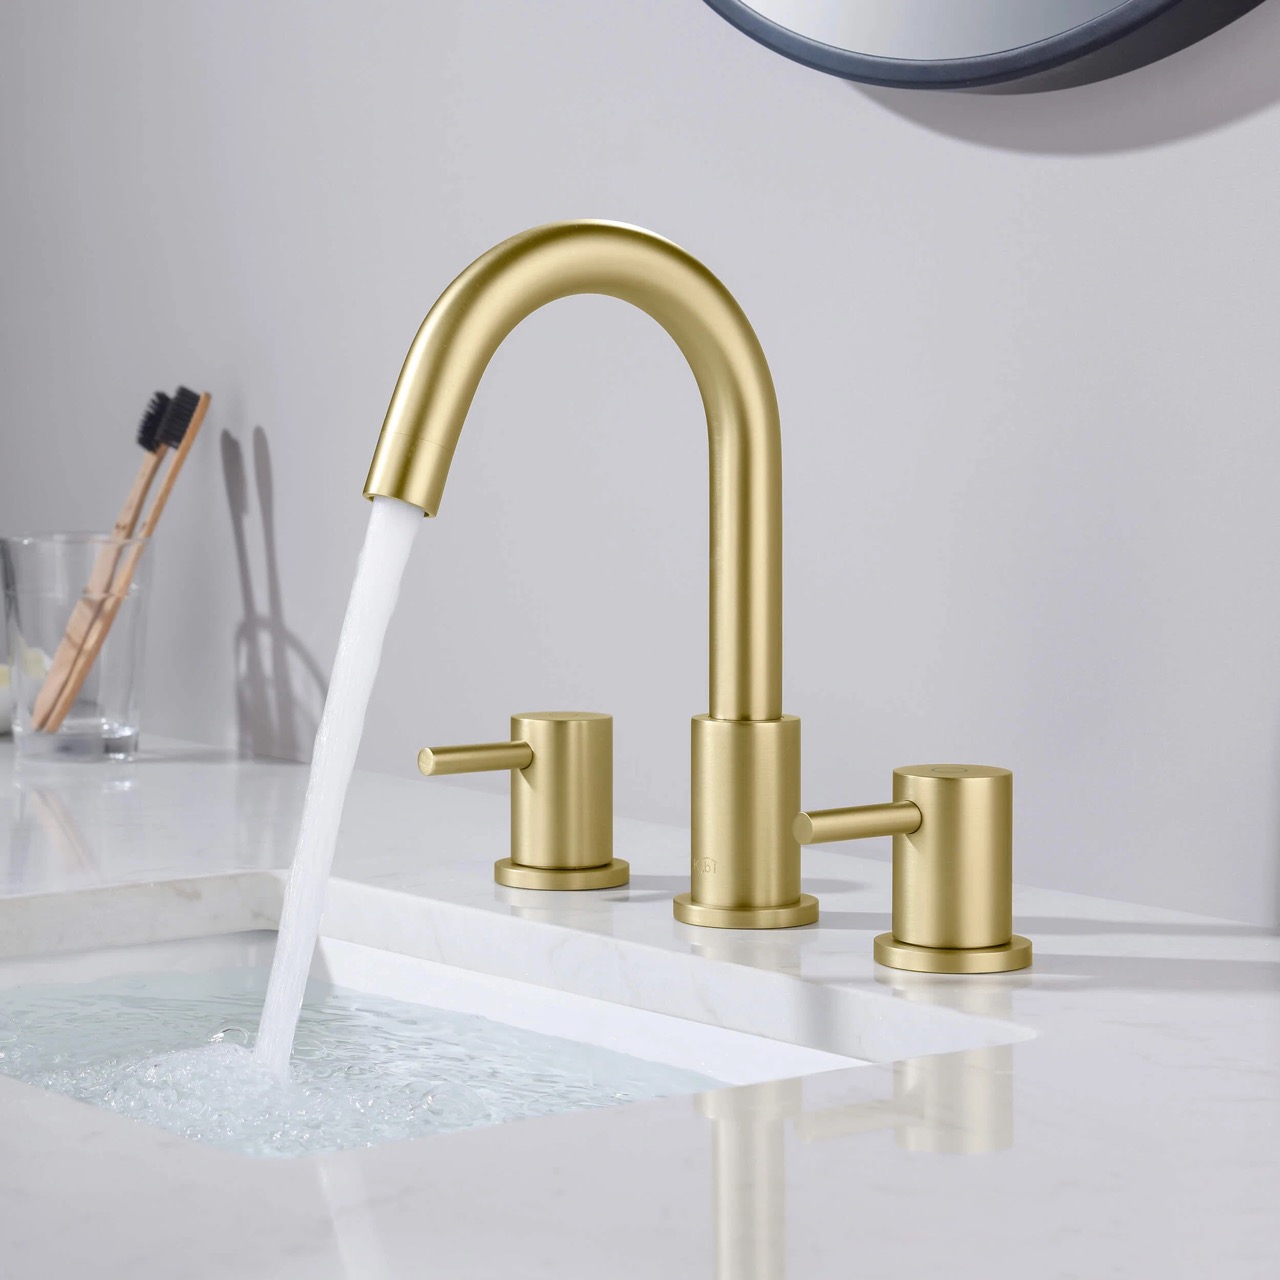 10 Crucial Questions To Ask Before Buying Bathroom Faucets